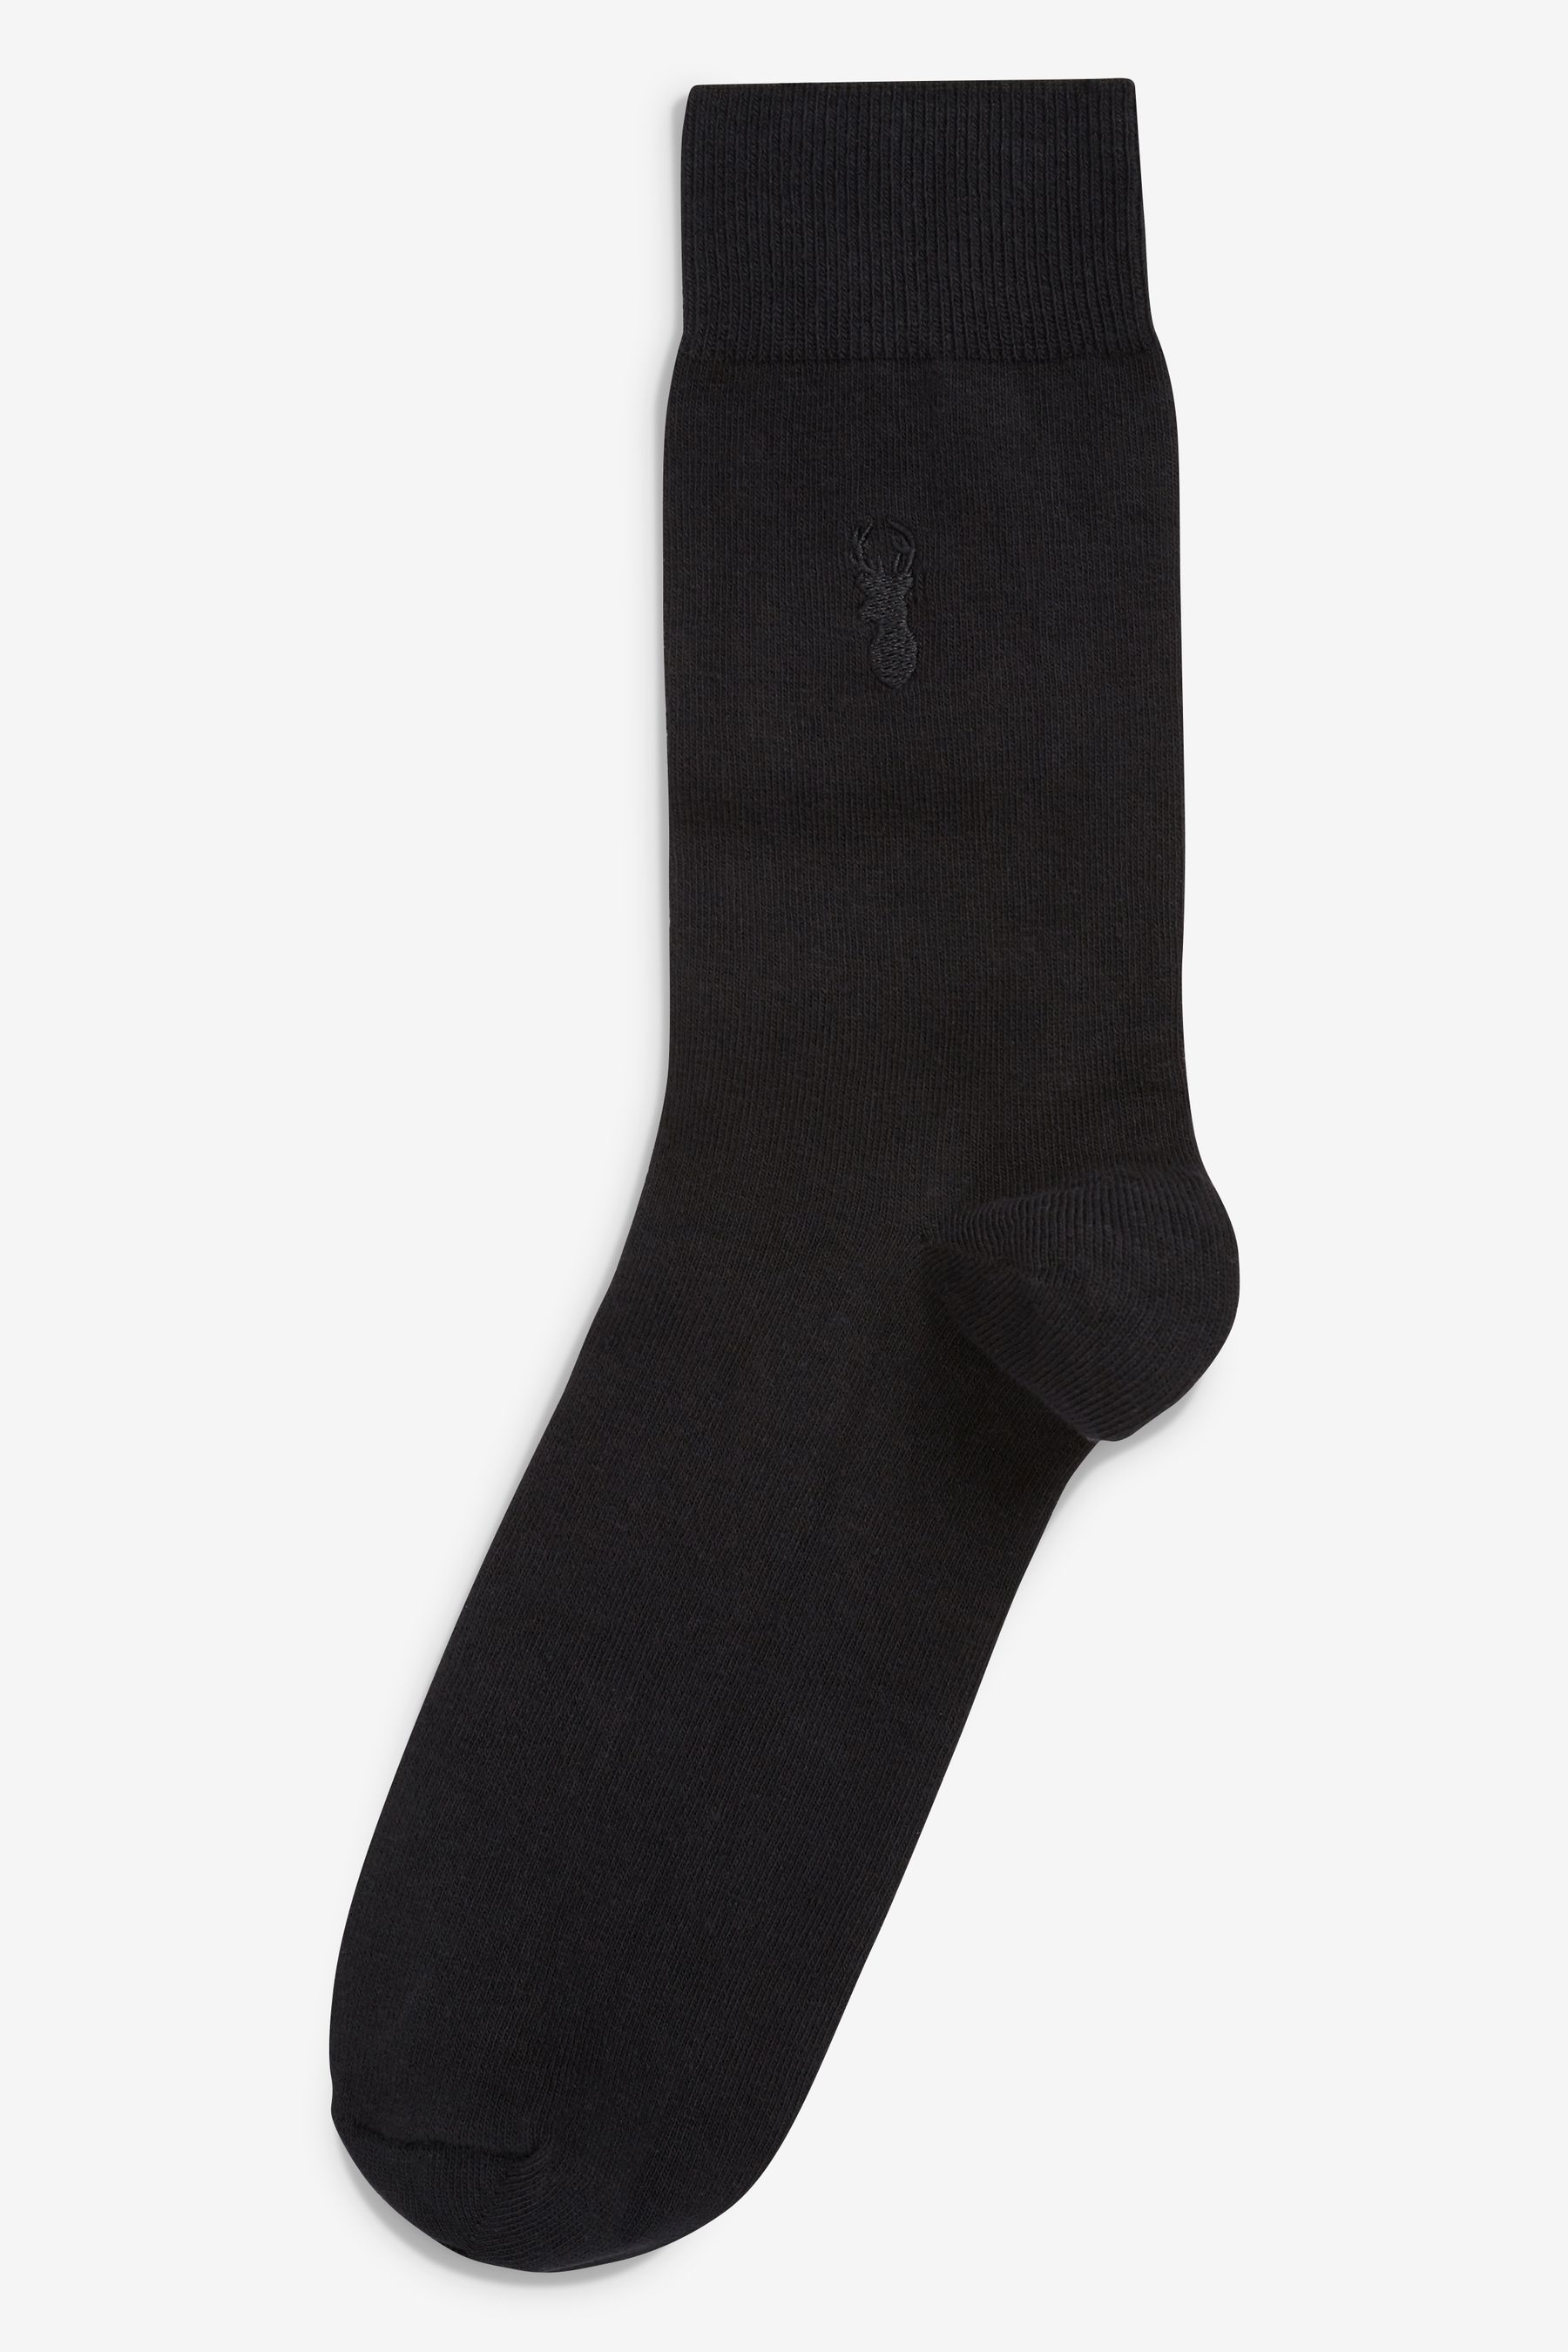 Buy Black Stag 5 Pack Embroidered Stag Socks from the Next UK online shop